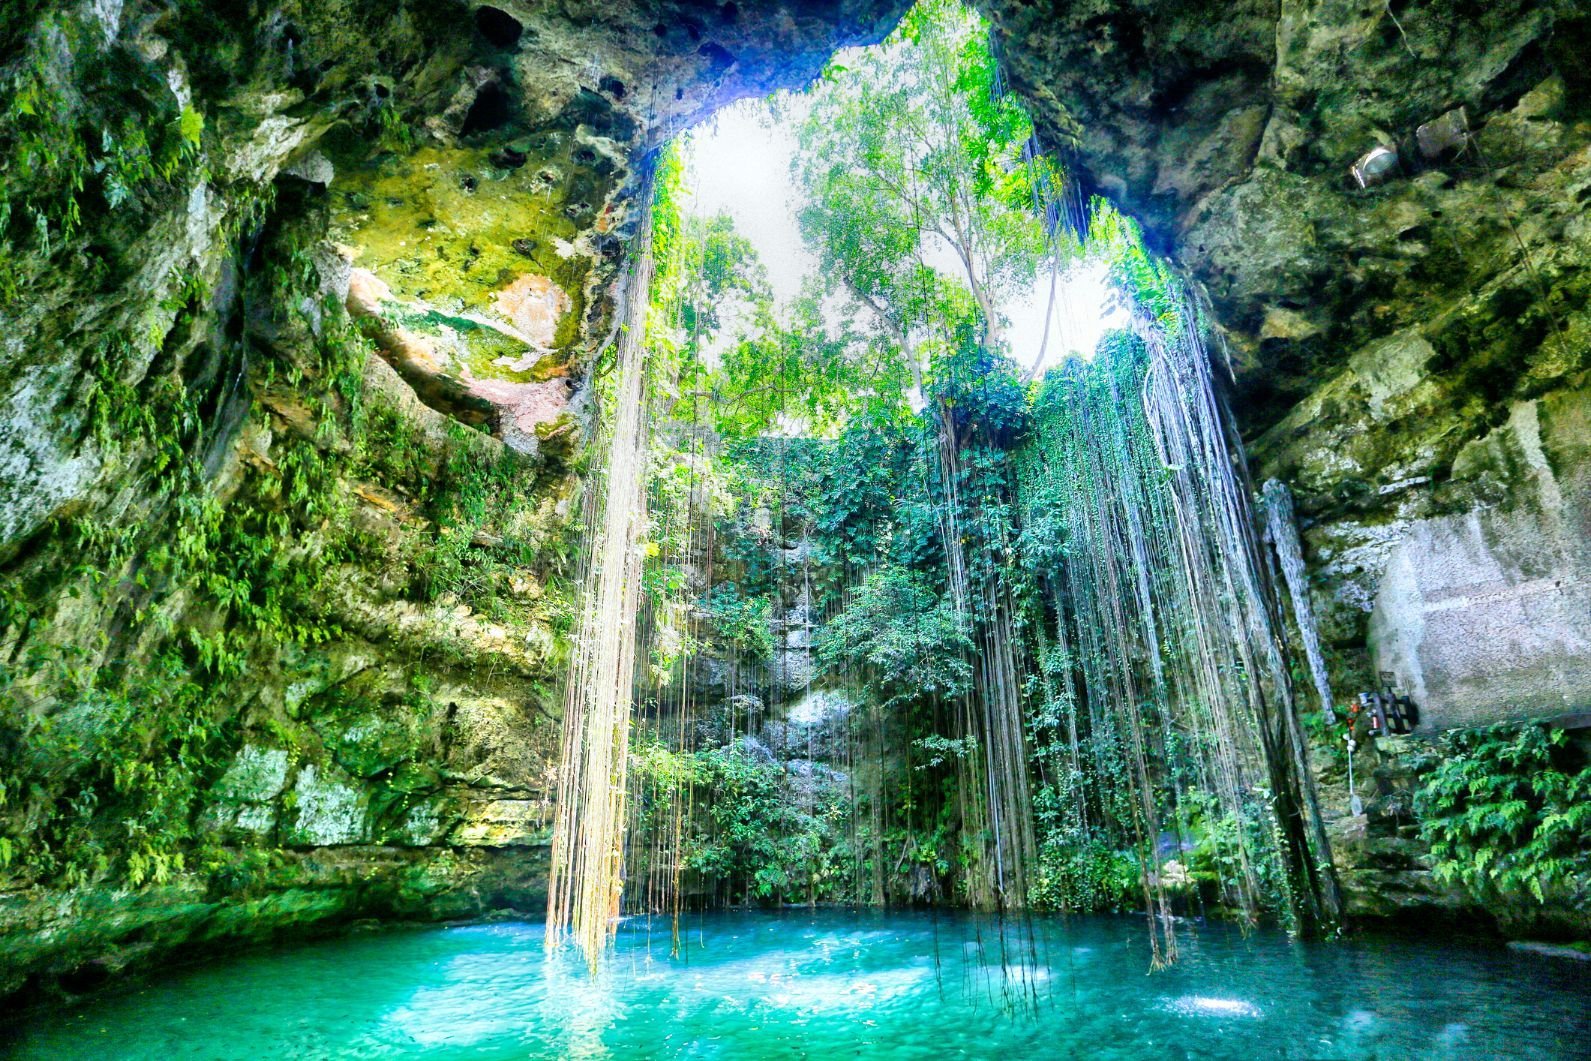 The 8 best Cenotes in the Riviera Maya